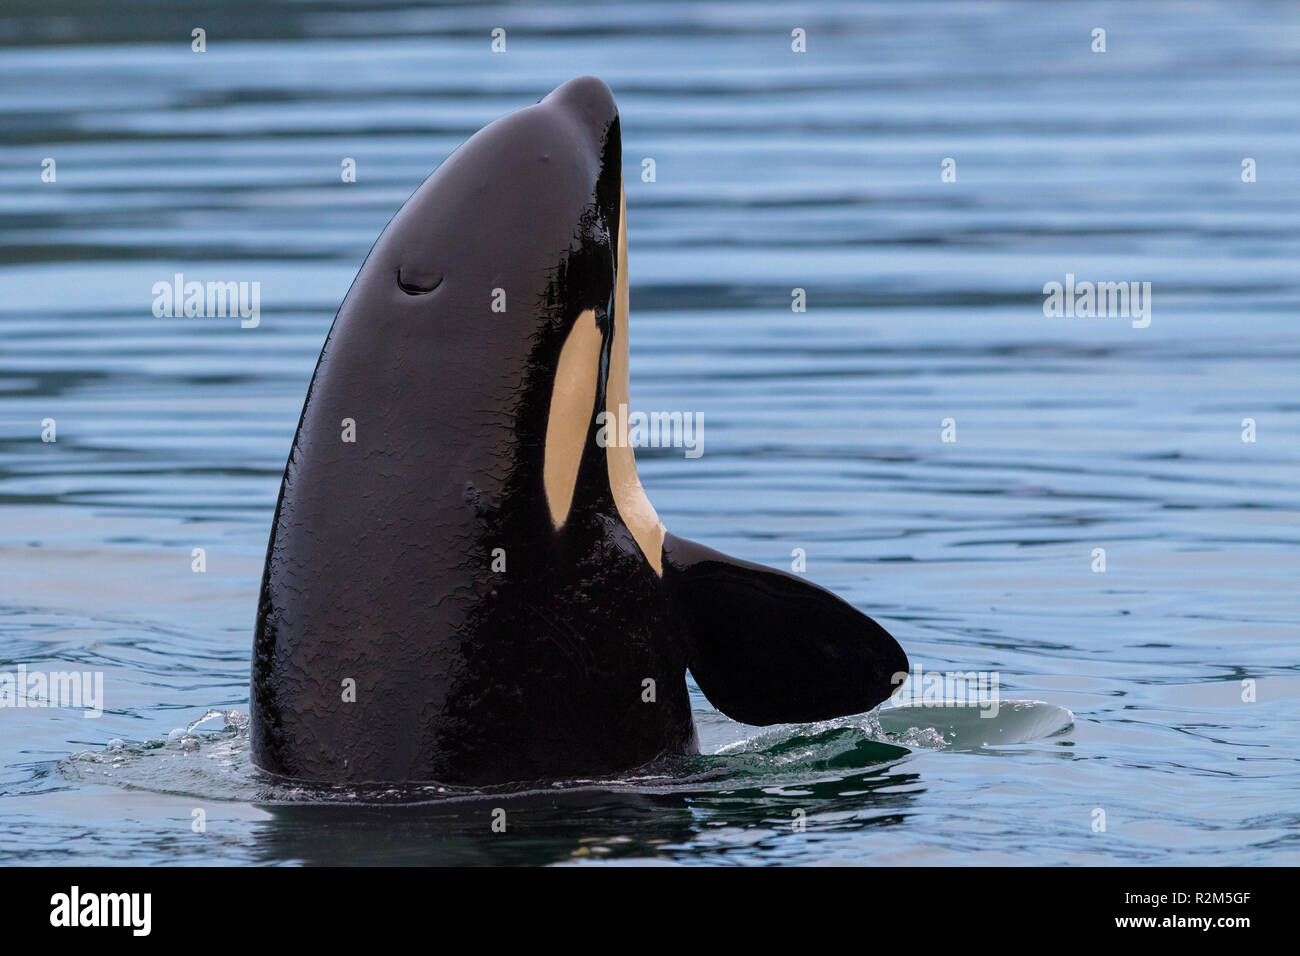 Northern resident killer whale baby (Orcinus orca) spy-hopping near Malcolm Island in Queen Charlotte Strait, Great Bear Rainforest coast, British Col Stock Photo